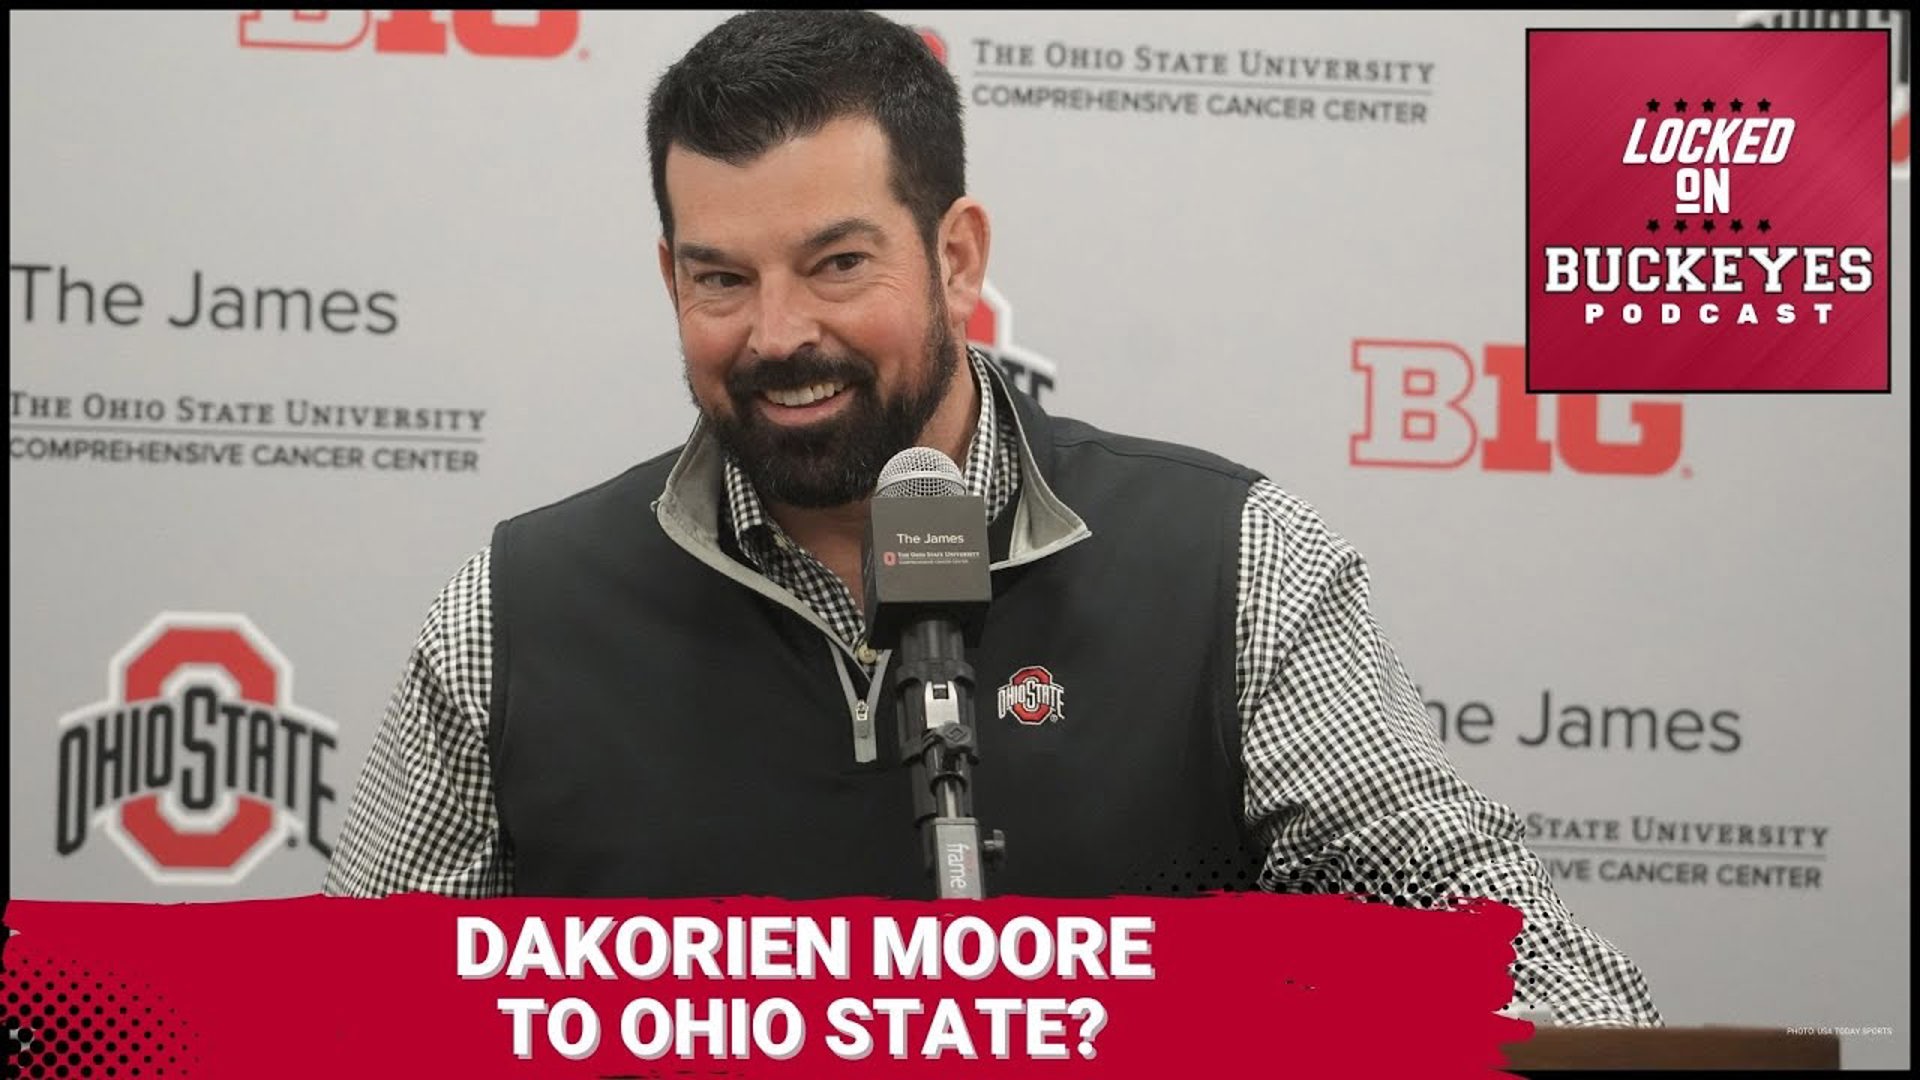 Dakorien Moore is one of the best wide receivers in the class of 2025. The 5 star prospect recently made a big decision that helped Ohio State.